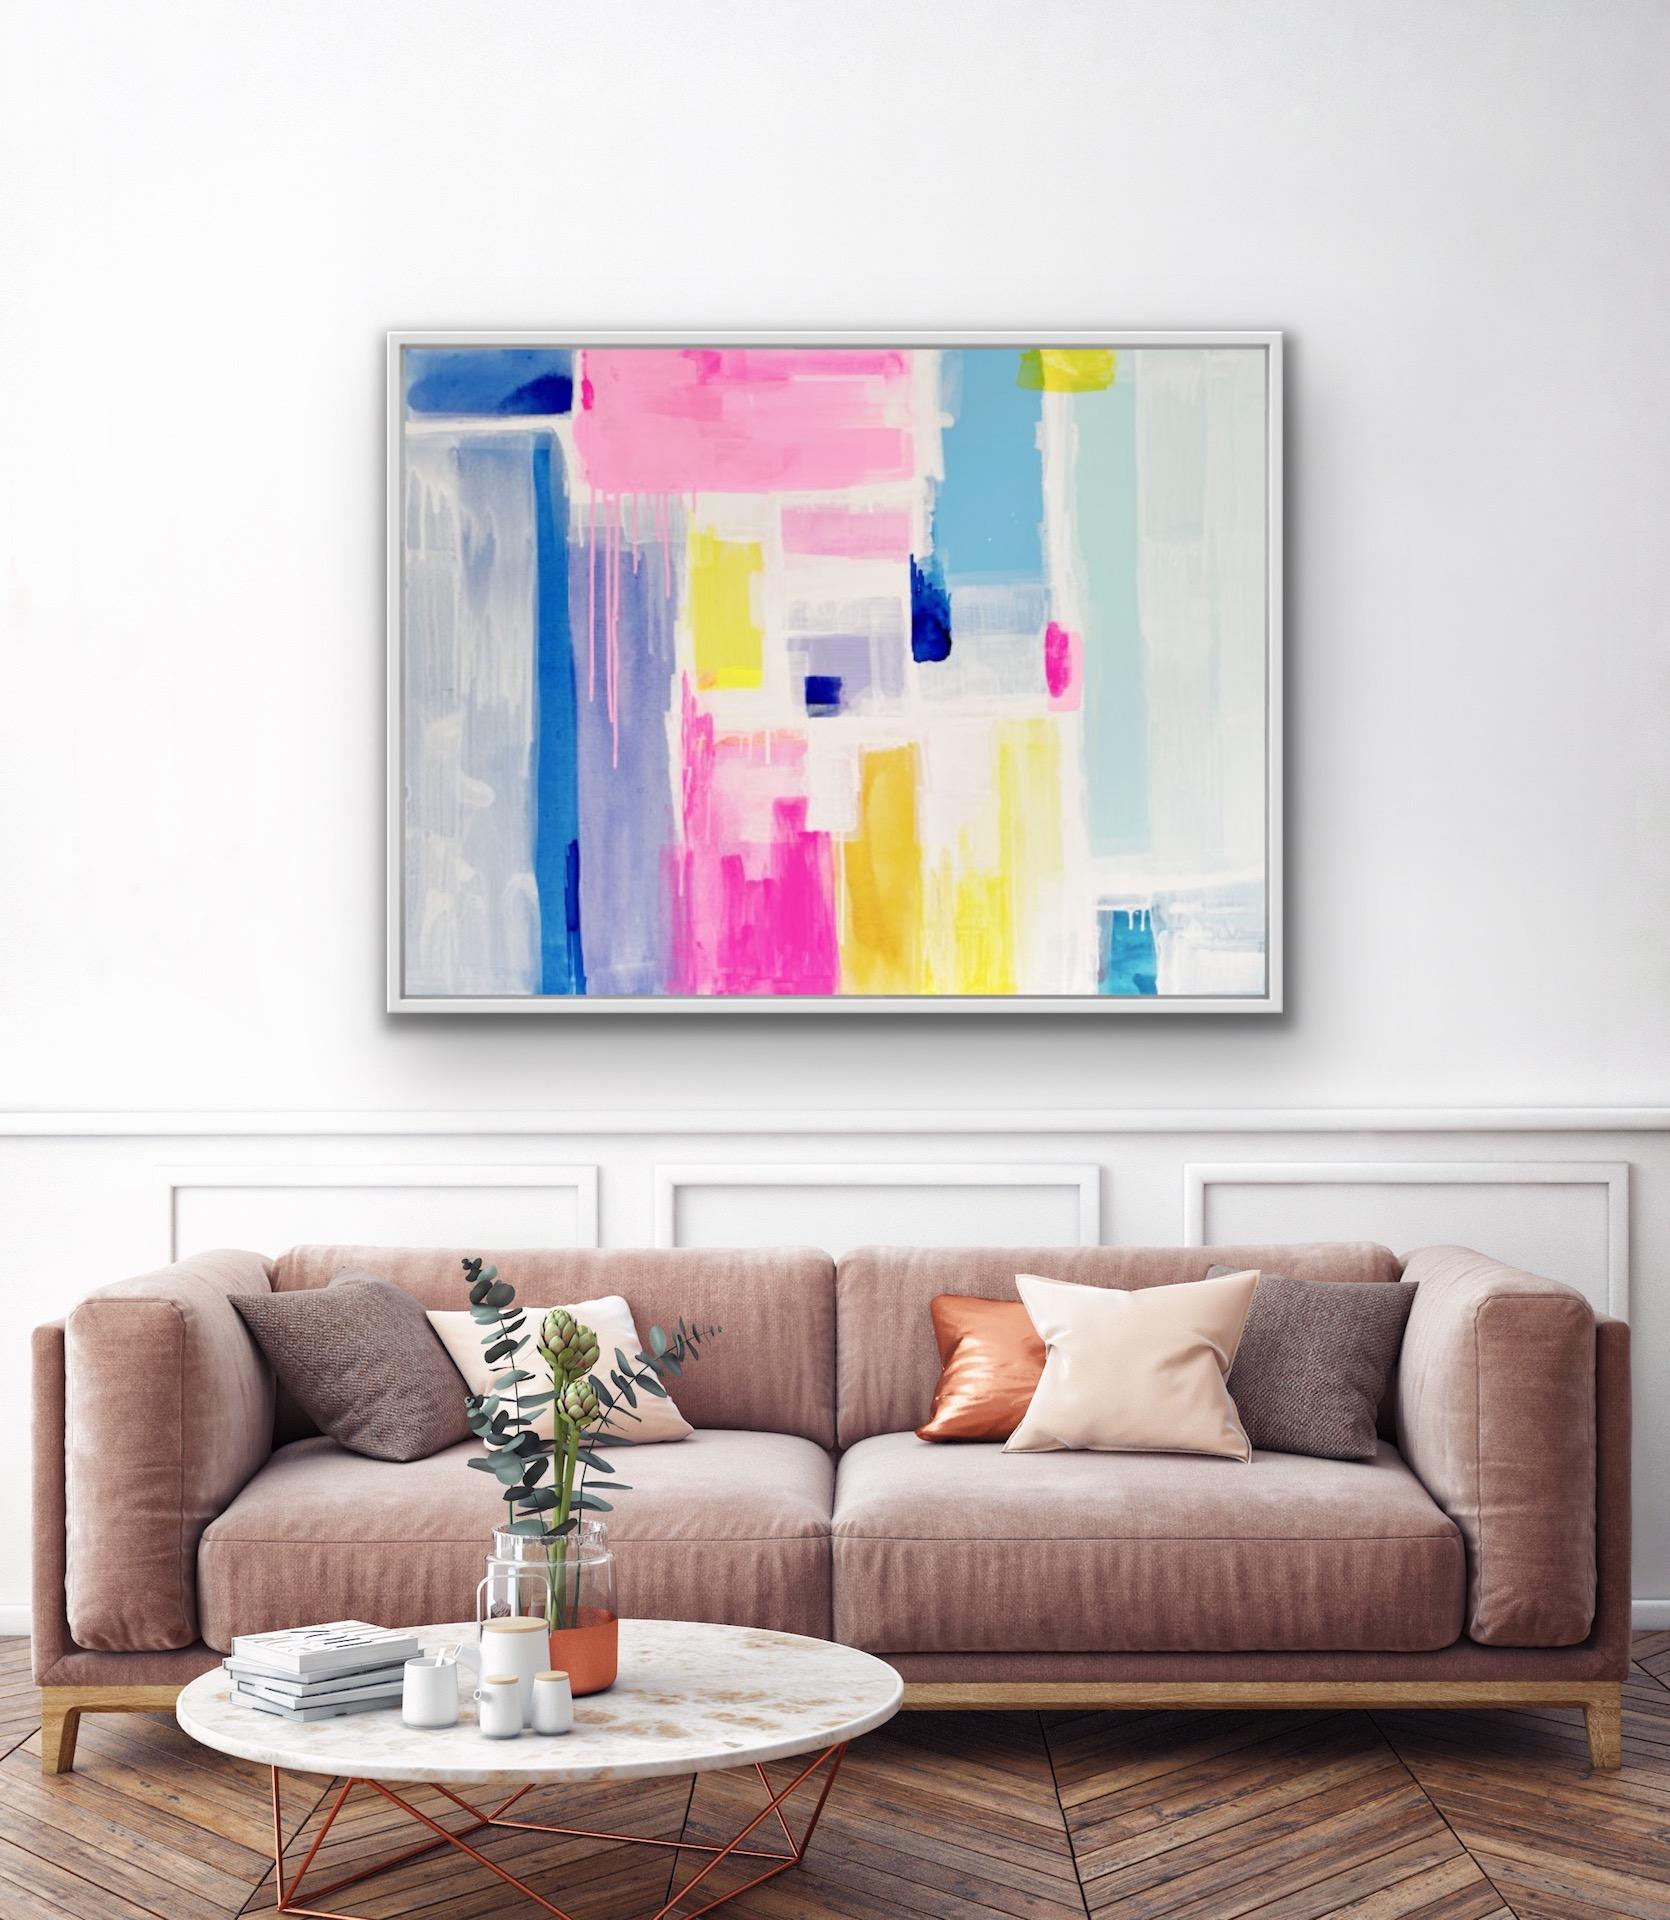 Rebecca Newport, Dreaming in Colour, Contemporary Abstract Painting 2